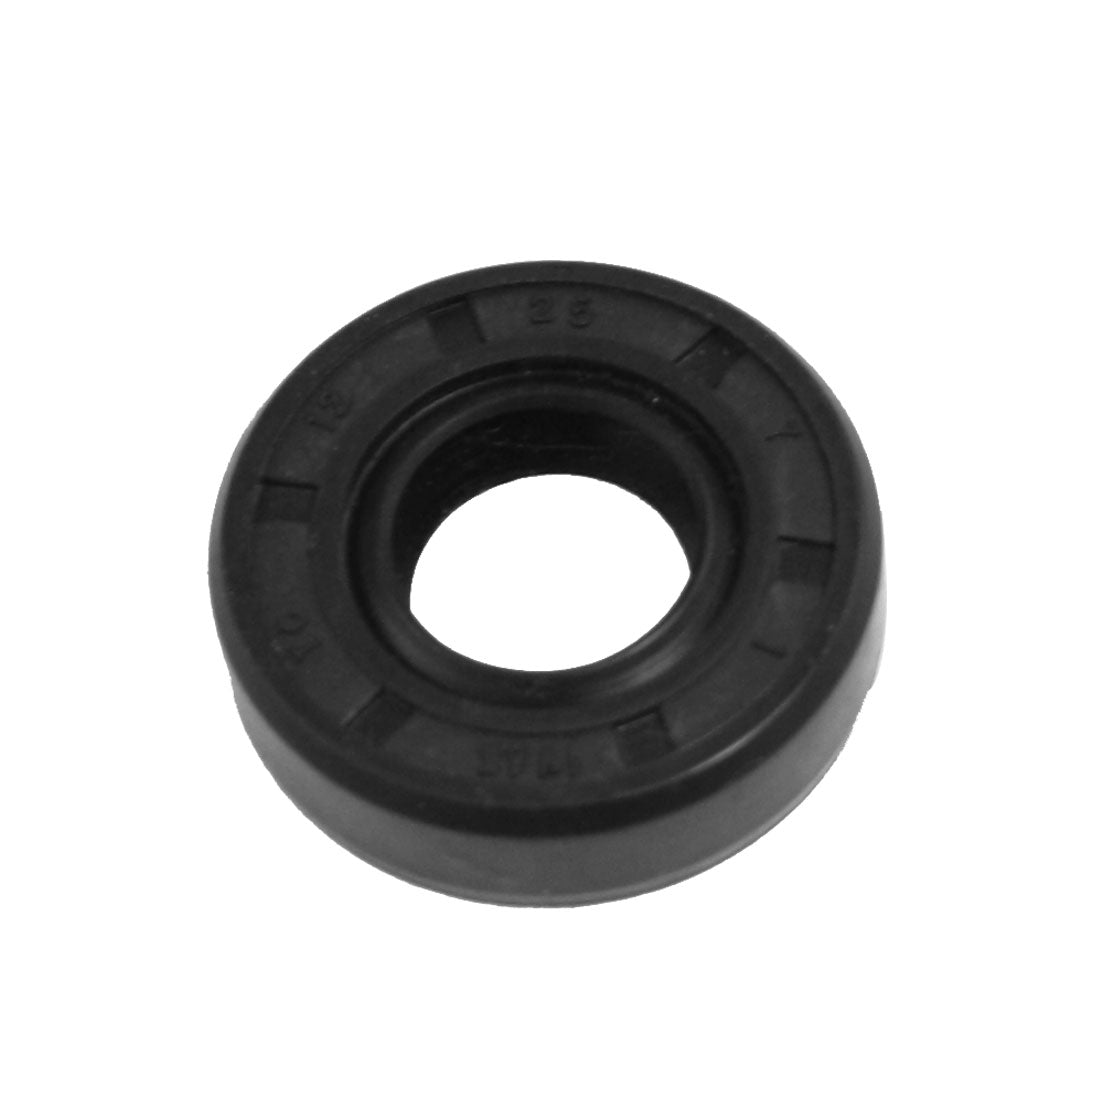 Uxcell Uxcell Black Nitrile Rubber Oil Shaft Seal TC 22mm x 35mm x 7mm